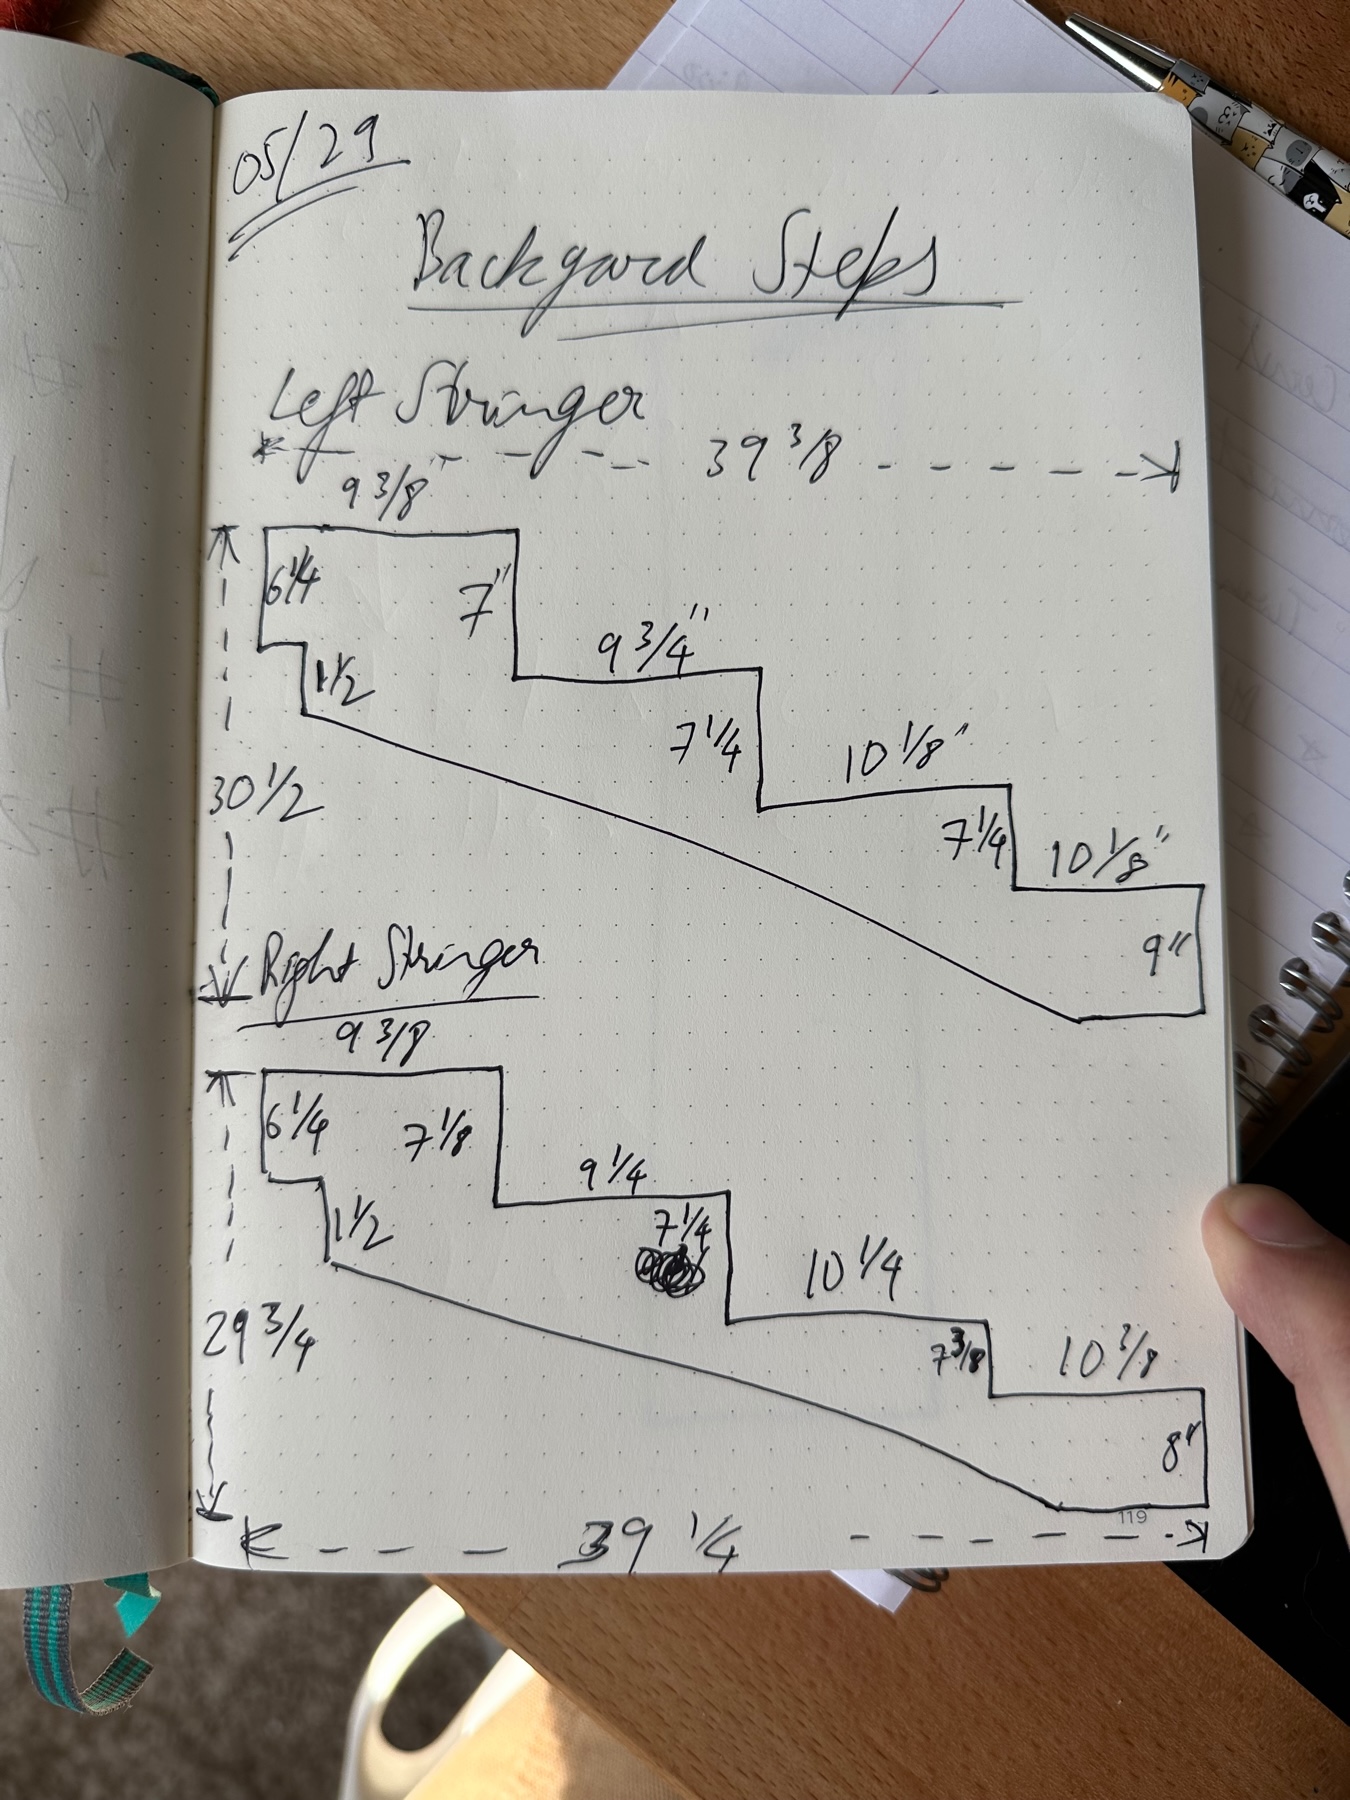 A page in a notebook with a rough sketch showing the geometry and measurements on each stringer. They differ significantly.